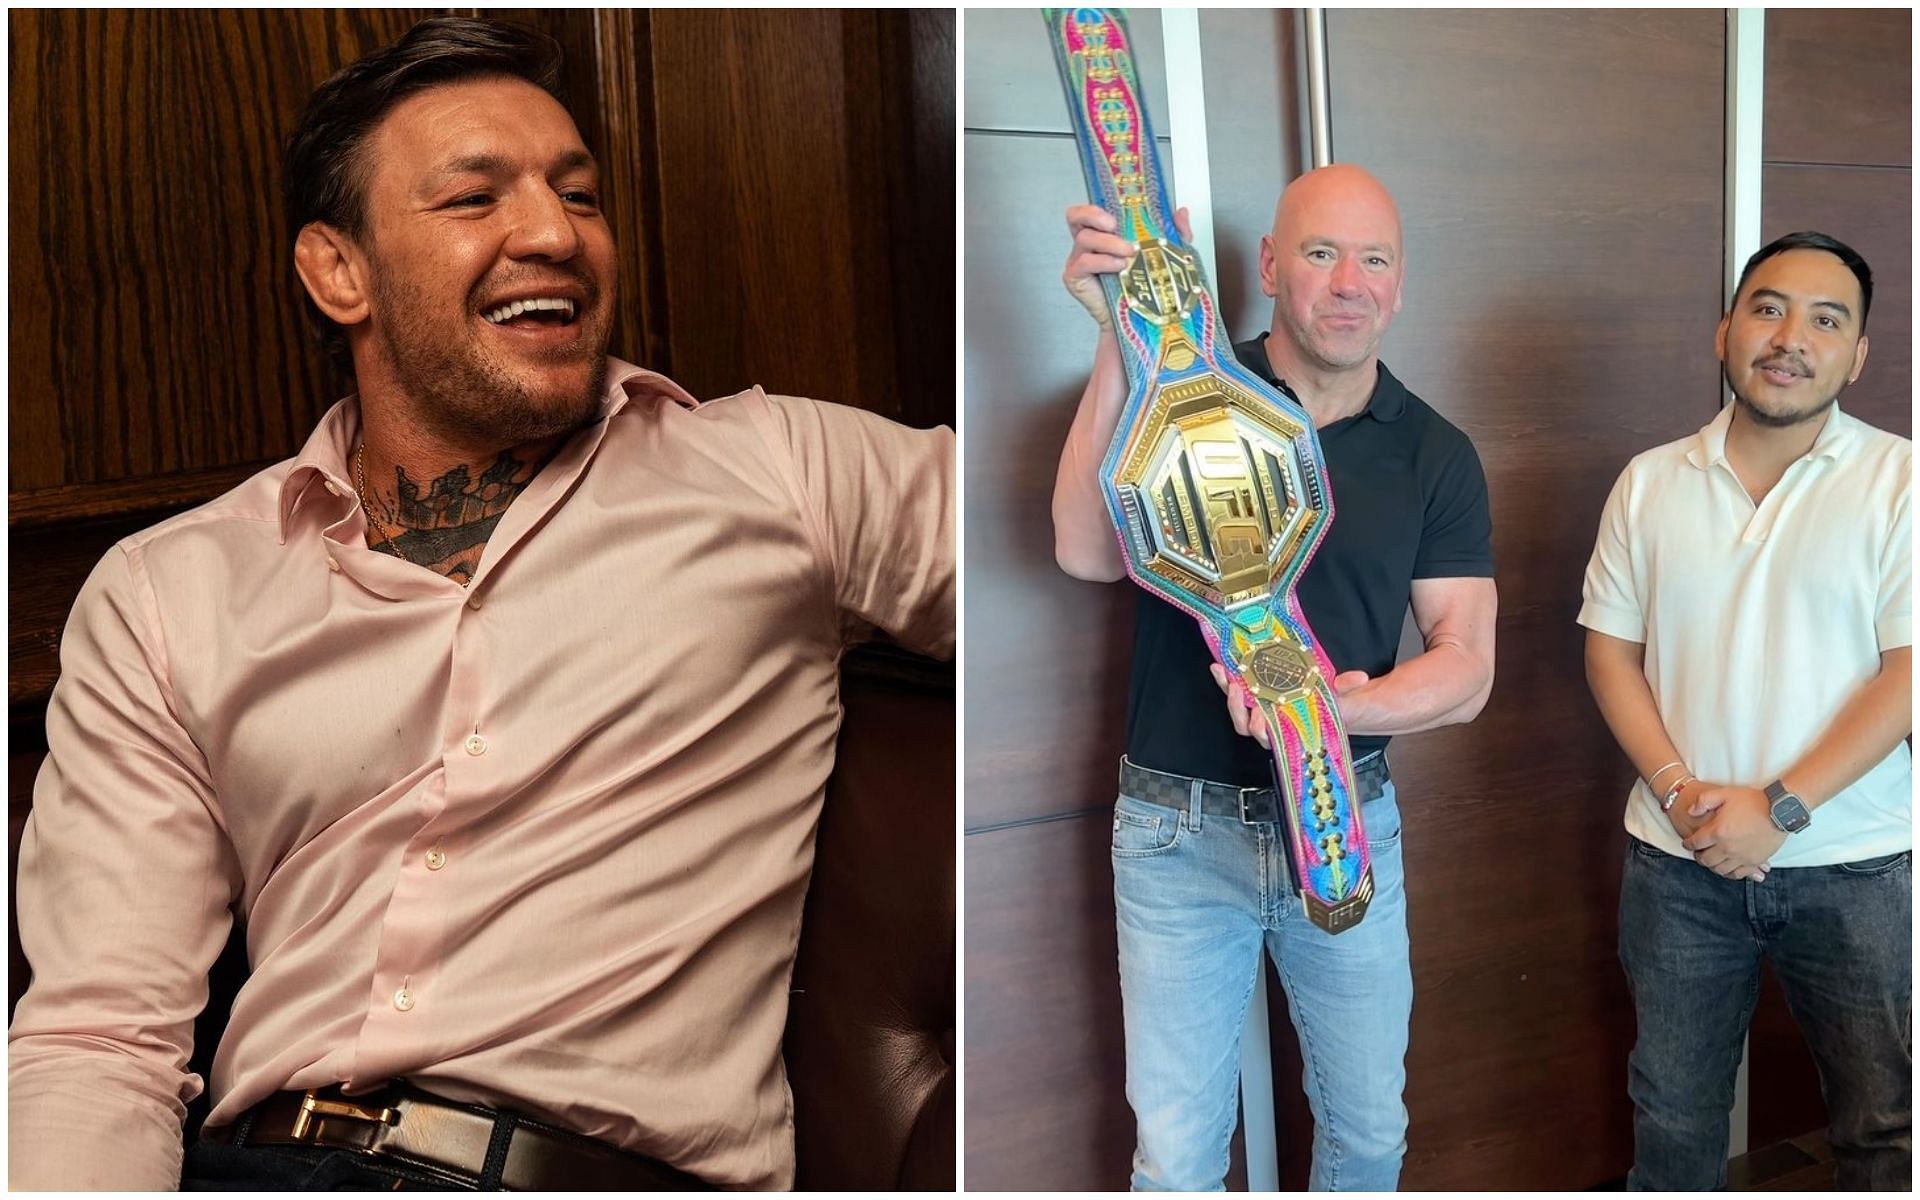 Conor McGregor and Dana White holding the custom Mexican belt